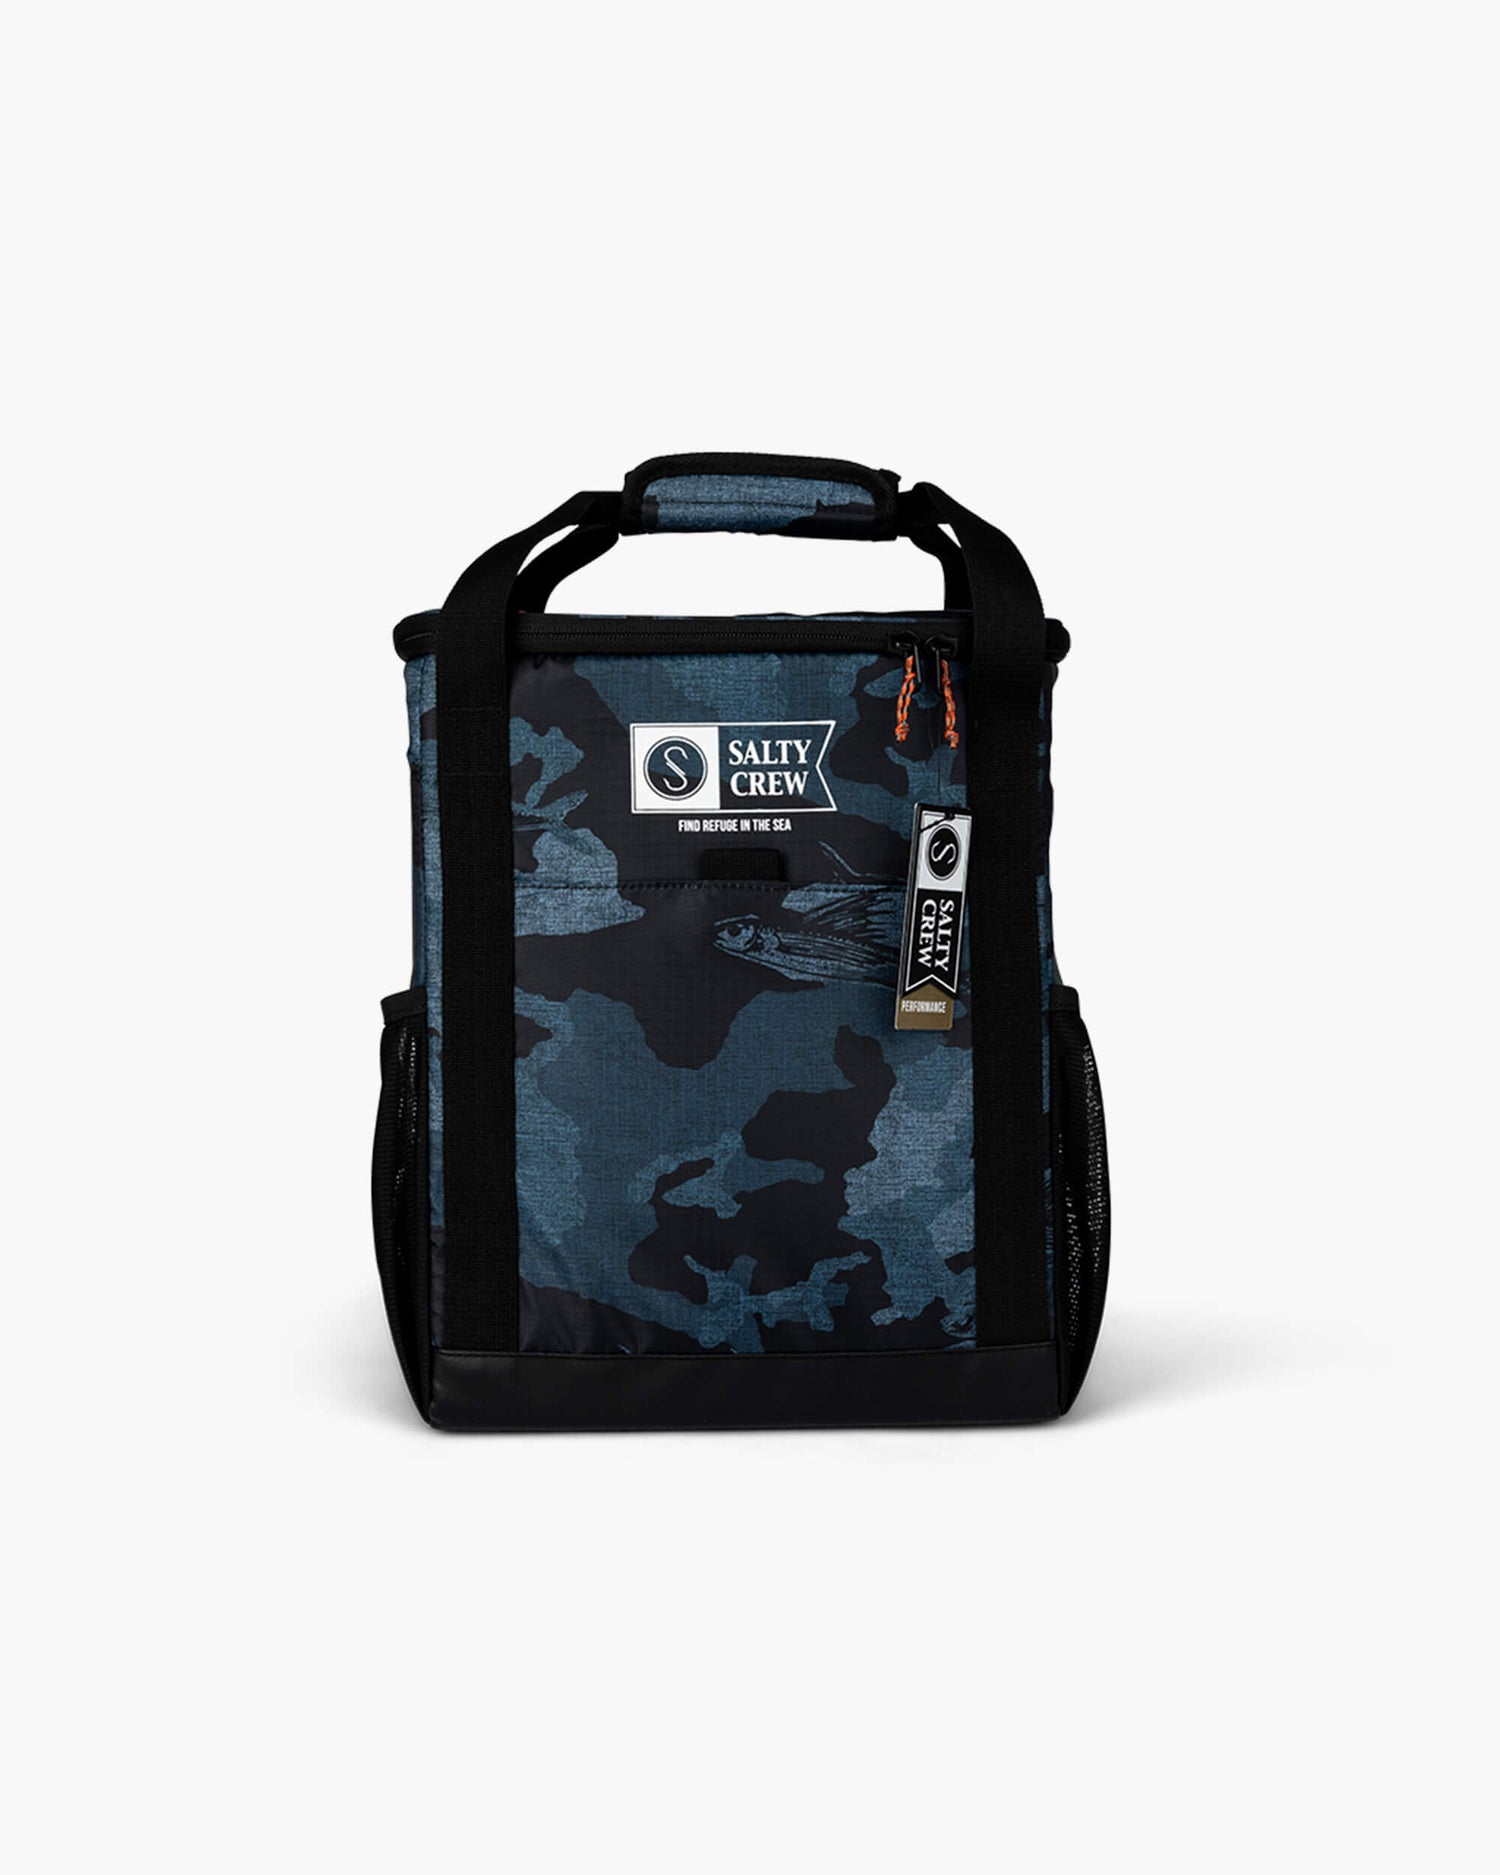 Salty crew BAGS Chiller Cooler Backpack - Blue Camo  in Blue Camo